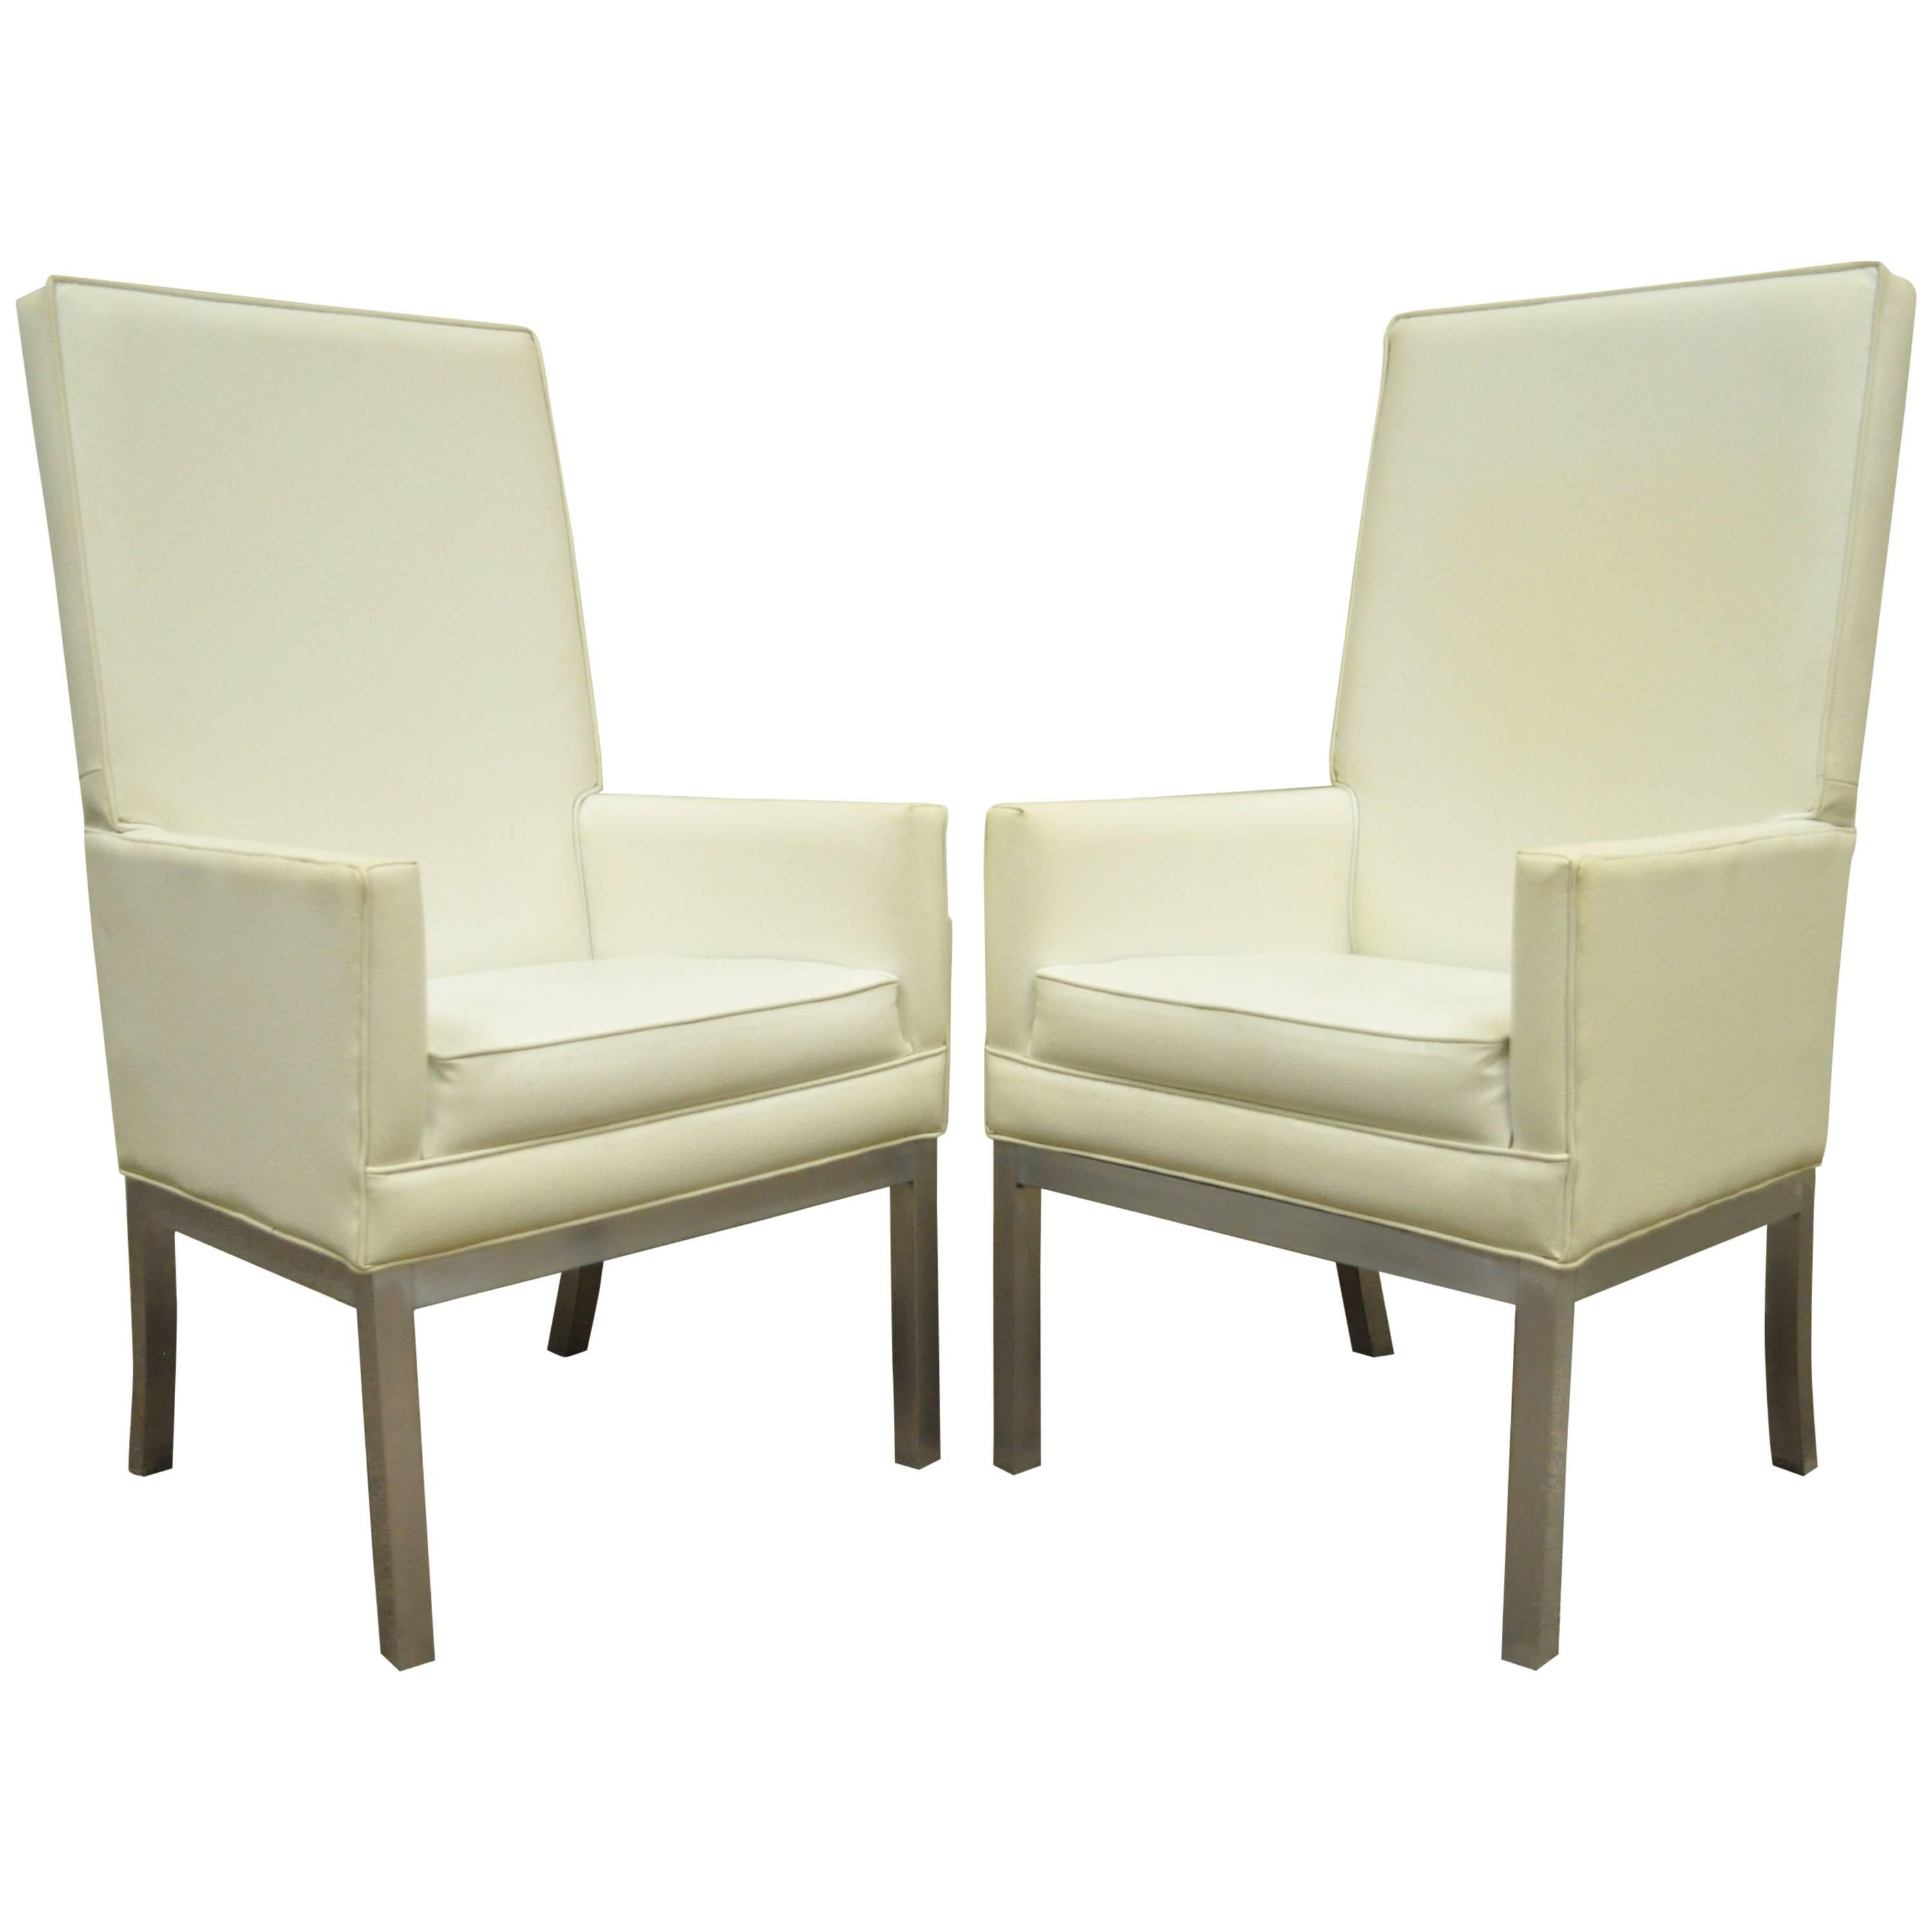 Pair of Mid Century Modern Brushed Aluminum Parsons Style Tall Back Armchairs